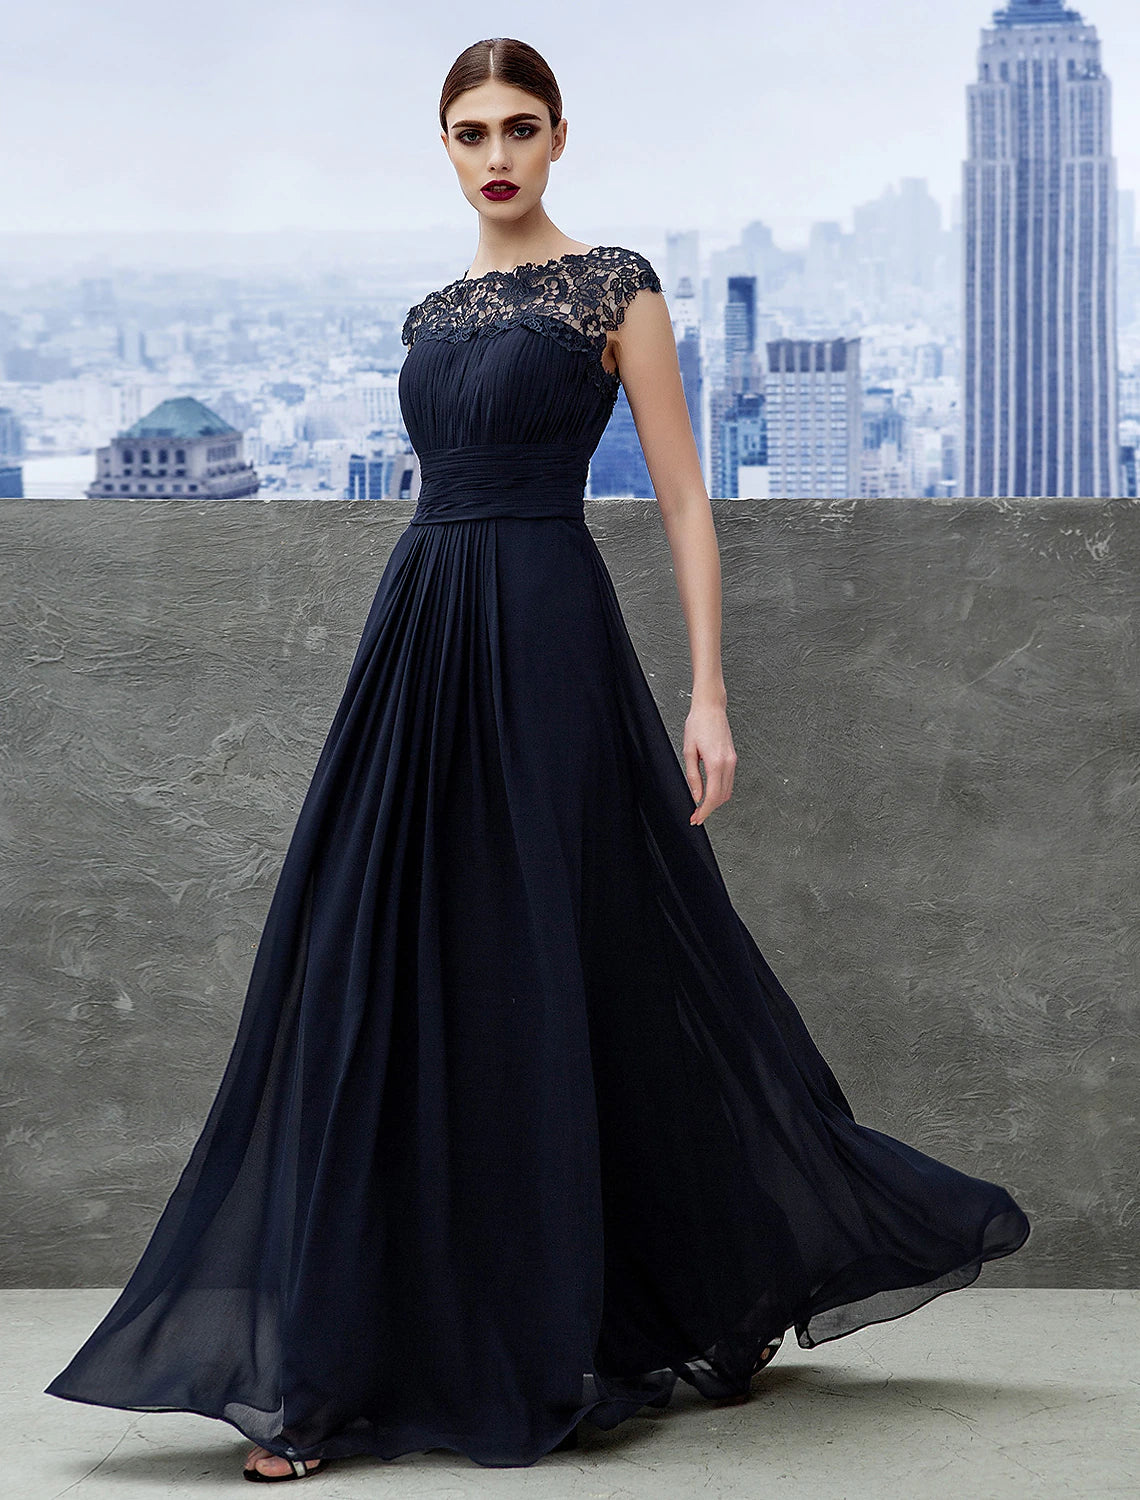 A-Line Evening Gown Empire Dress Wedding Guest Formal Evening Floor Length Short Sleeve Boat Neck Bridesmaid Dress Chiffon with Ruched Lace Insert